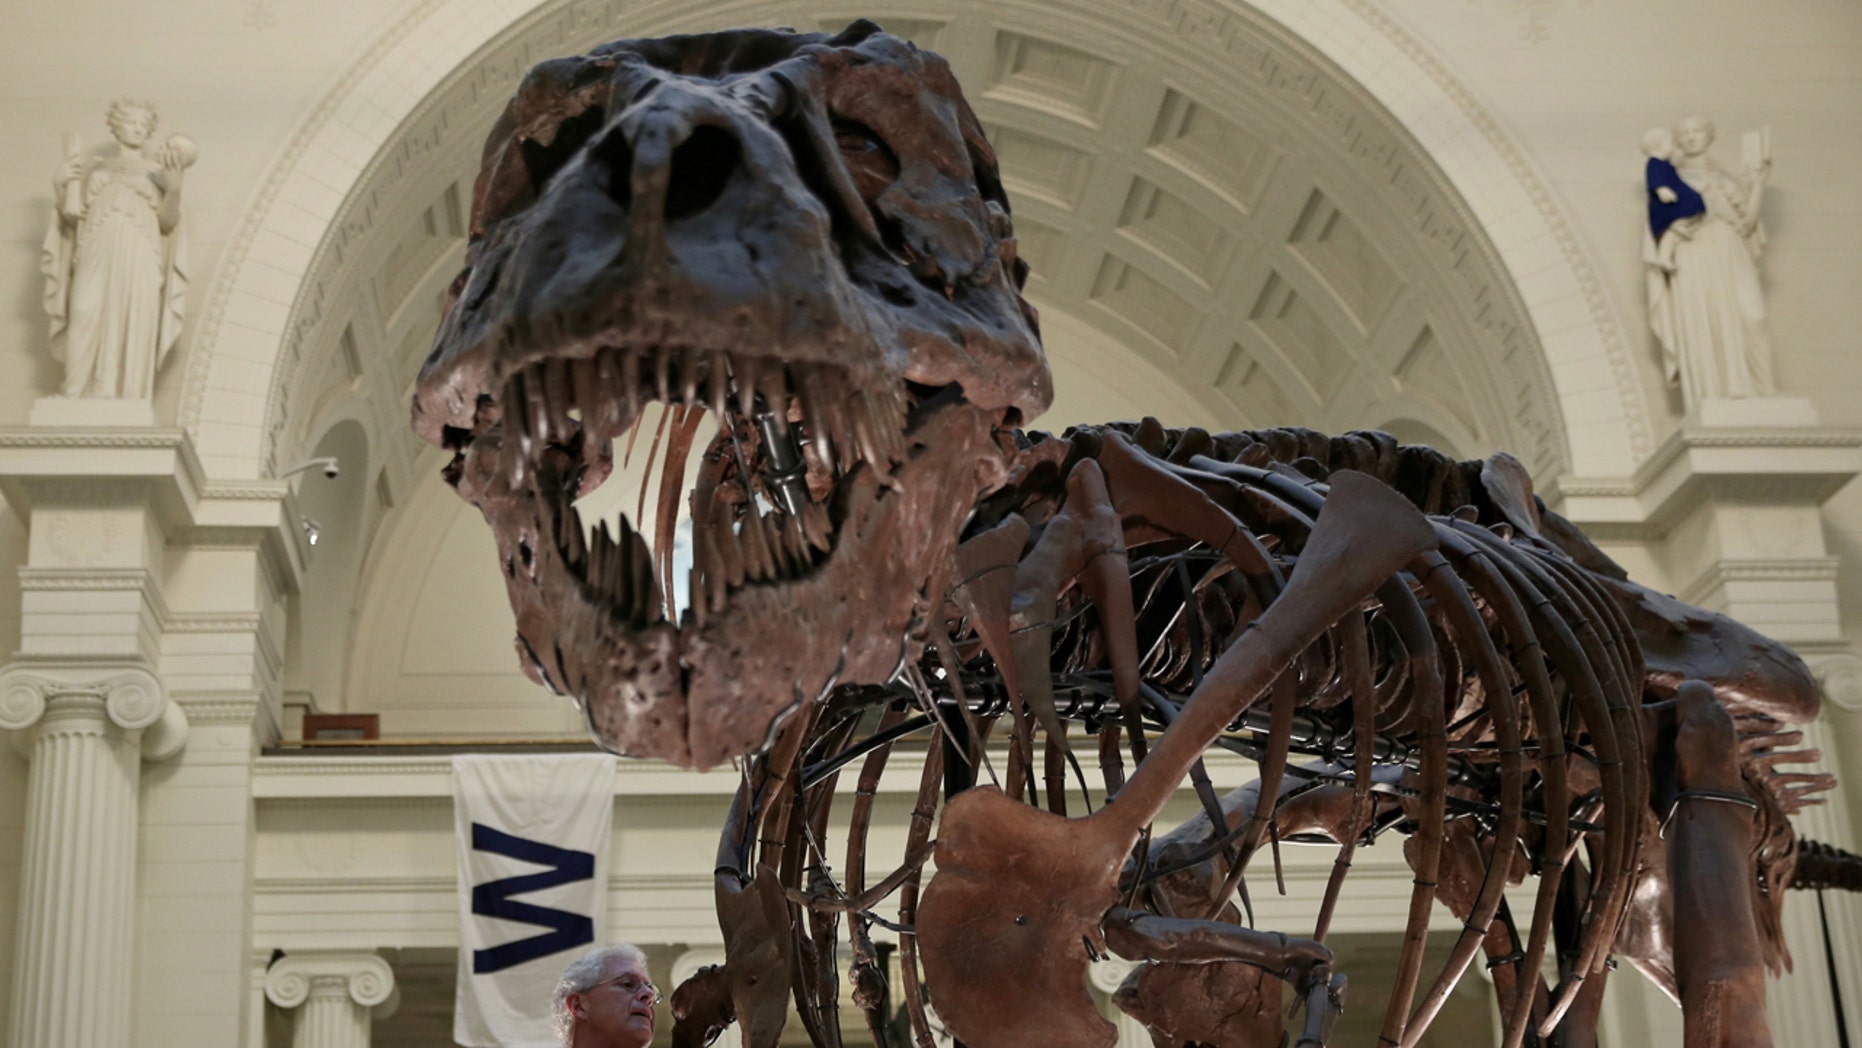 A fossil of a Tyrannosaurus rex known as "Sue" is seen in Chicago's Field Museum, Oct. 6, 2016.